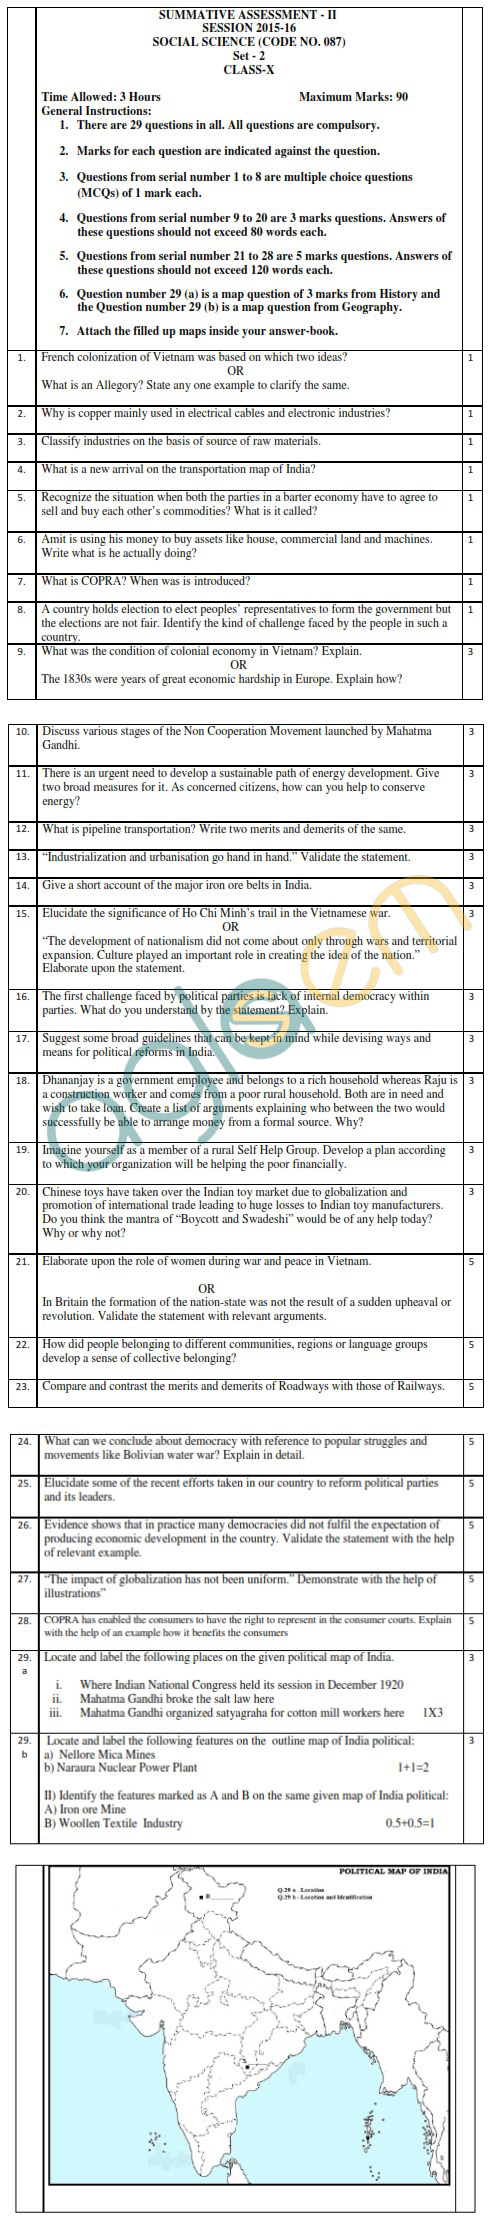 Ncert sample papers for class 9 science sa2